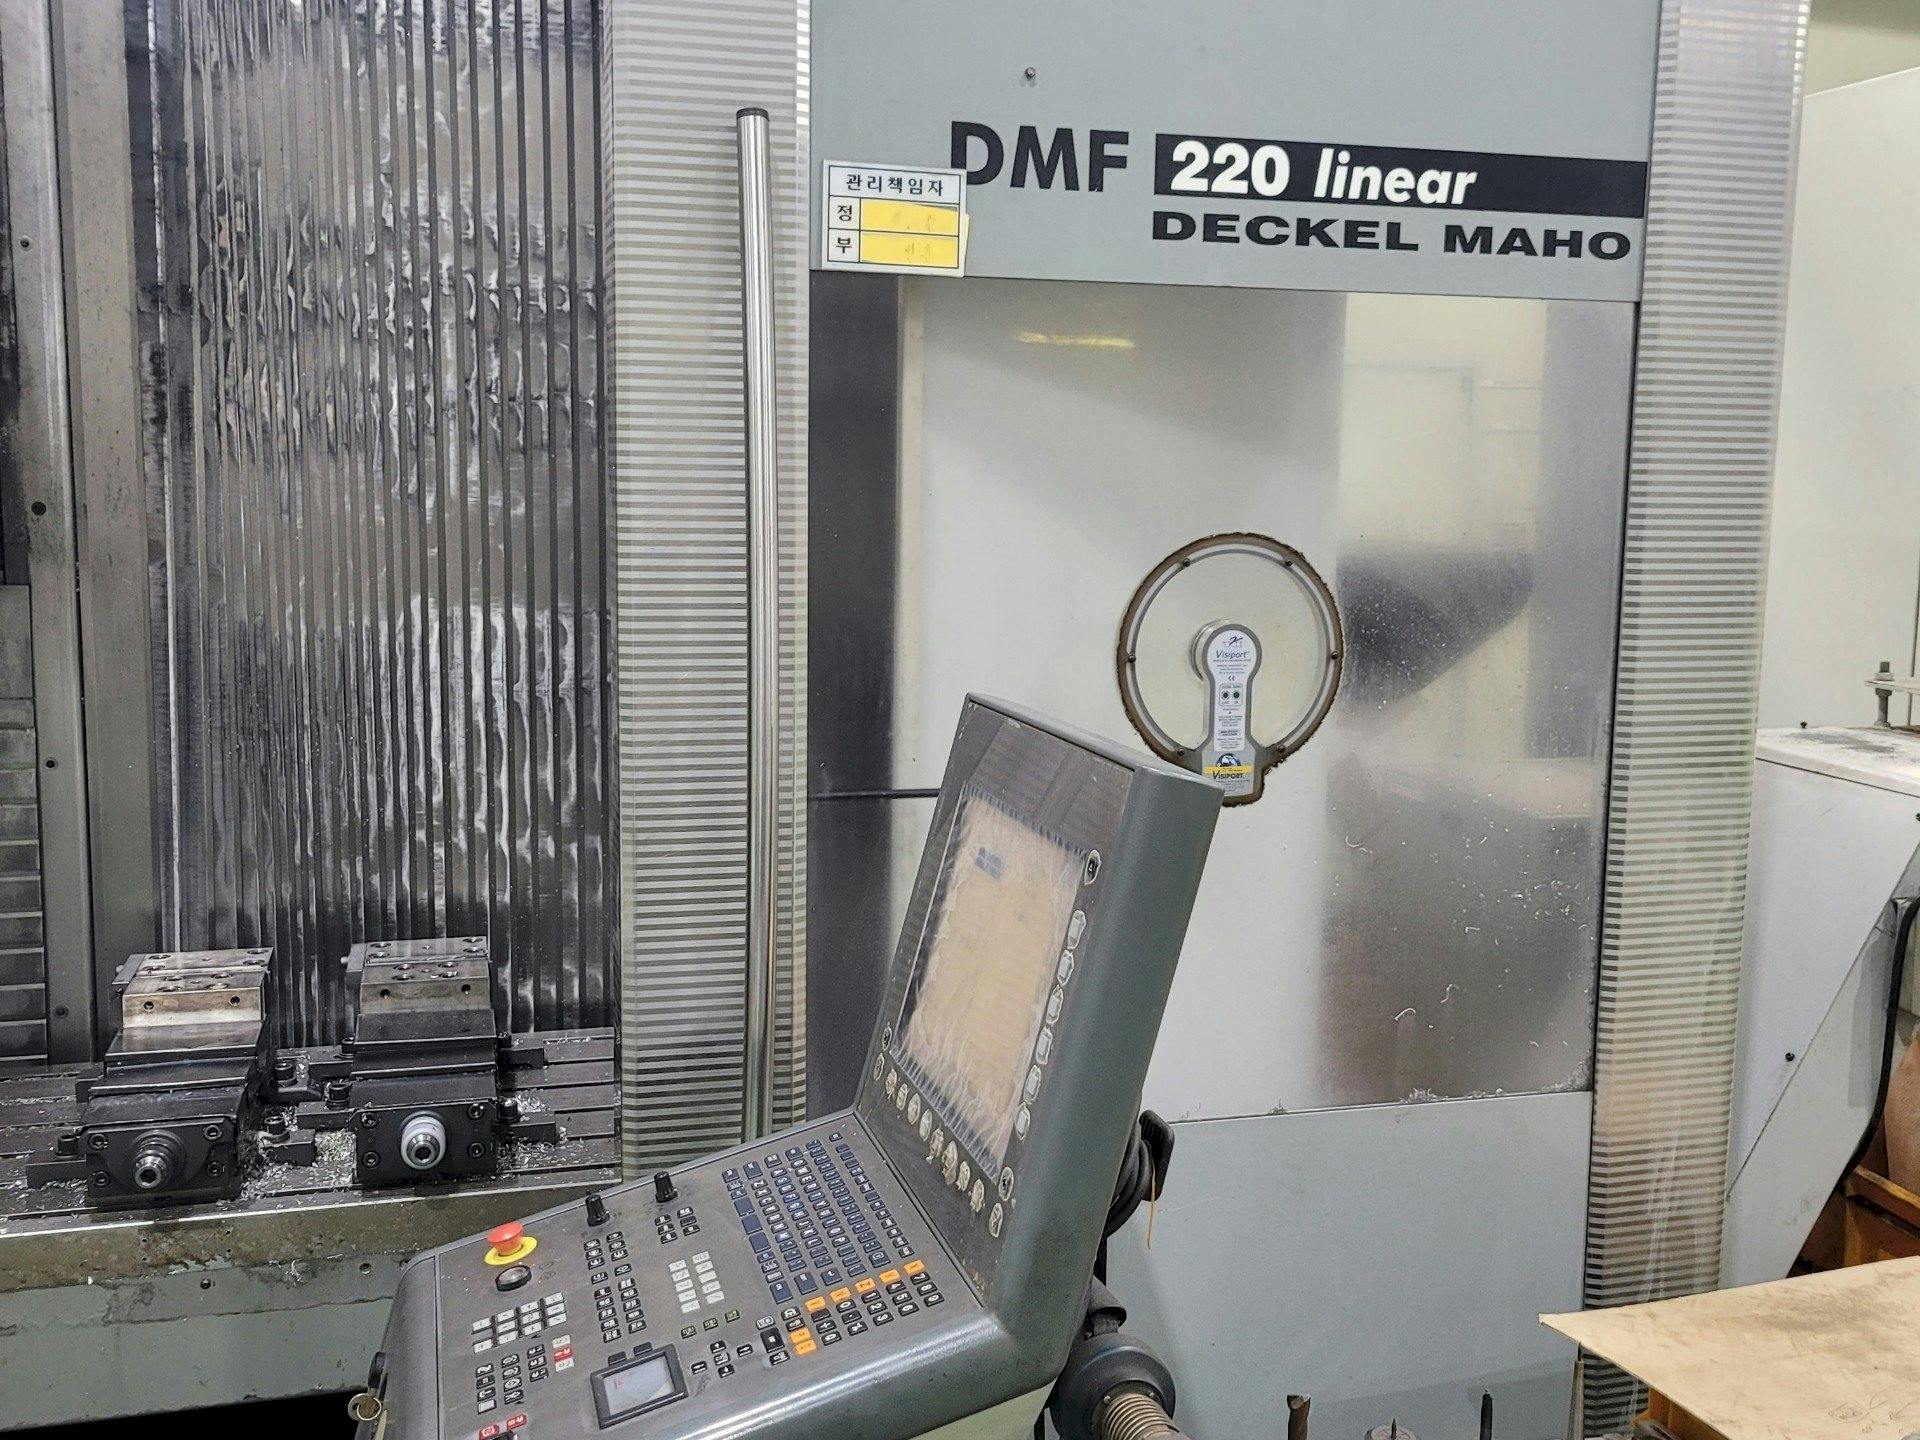 Front view of DECKEL MAHO DMF 220 Linear  machine